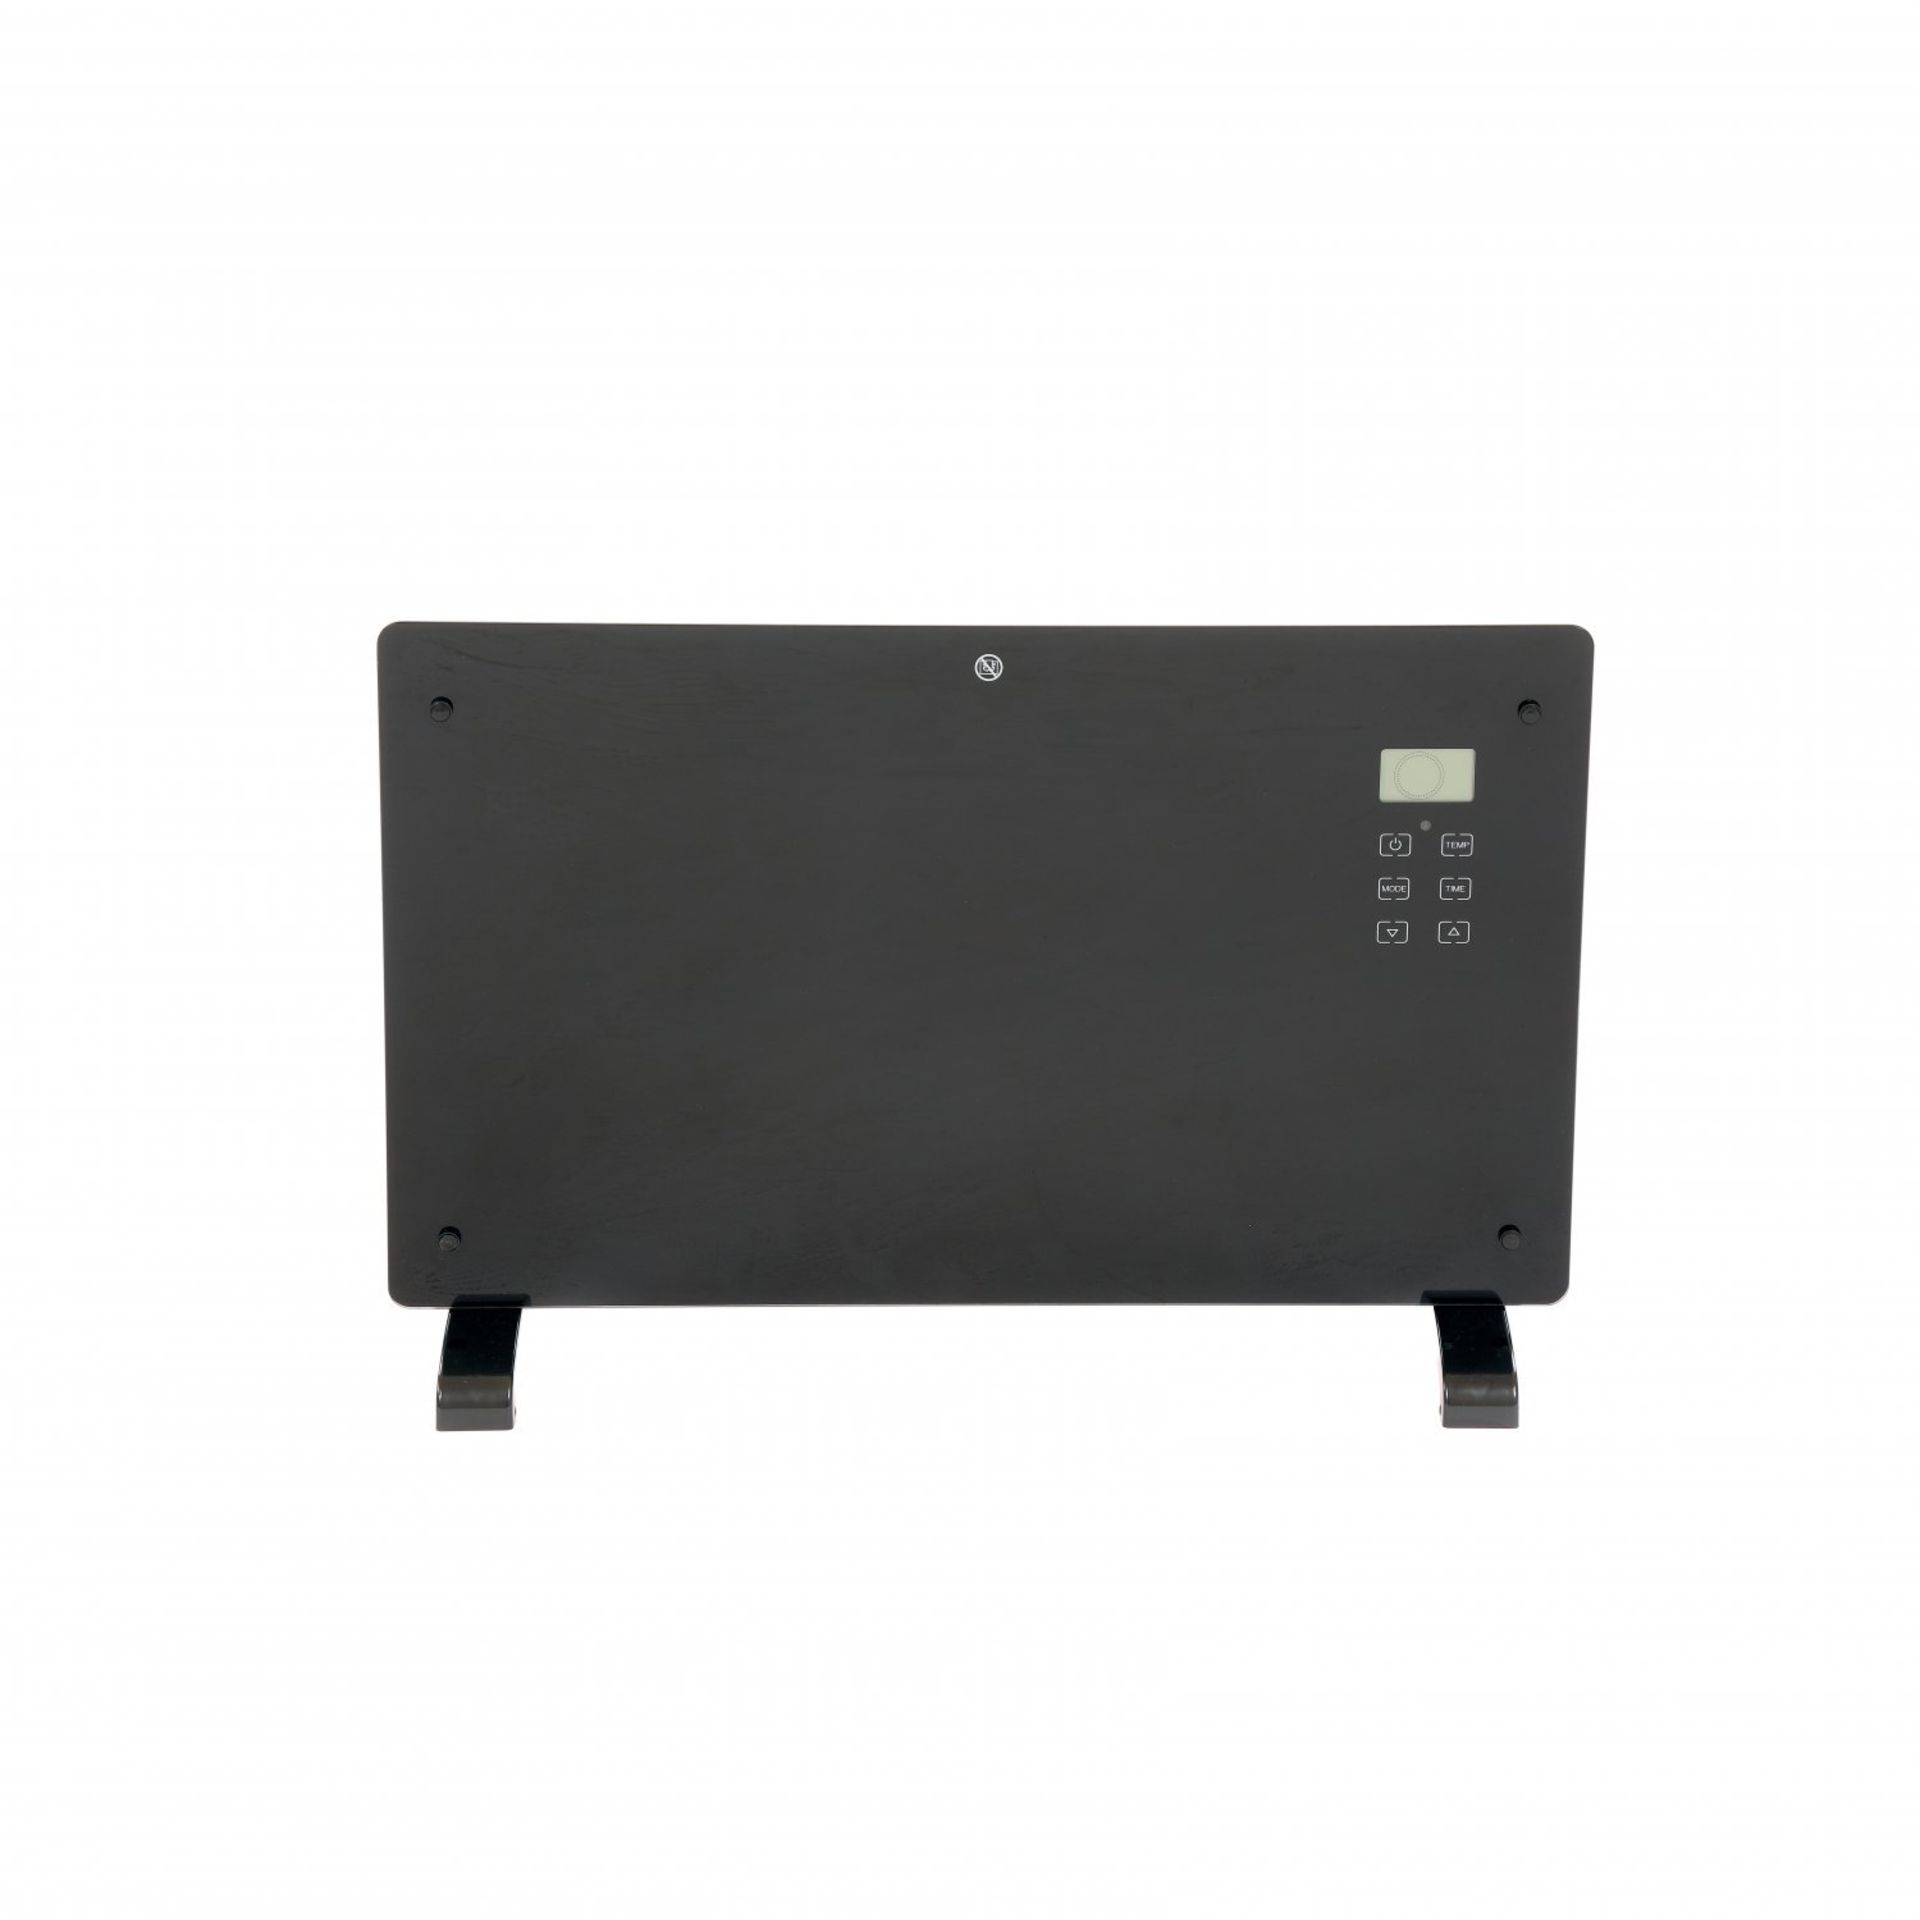 (SK84) 2000W Black Glass Free Standing Electric Panel Convector Heater Add some class and ... - Image 2 of 2